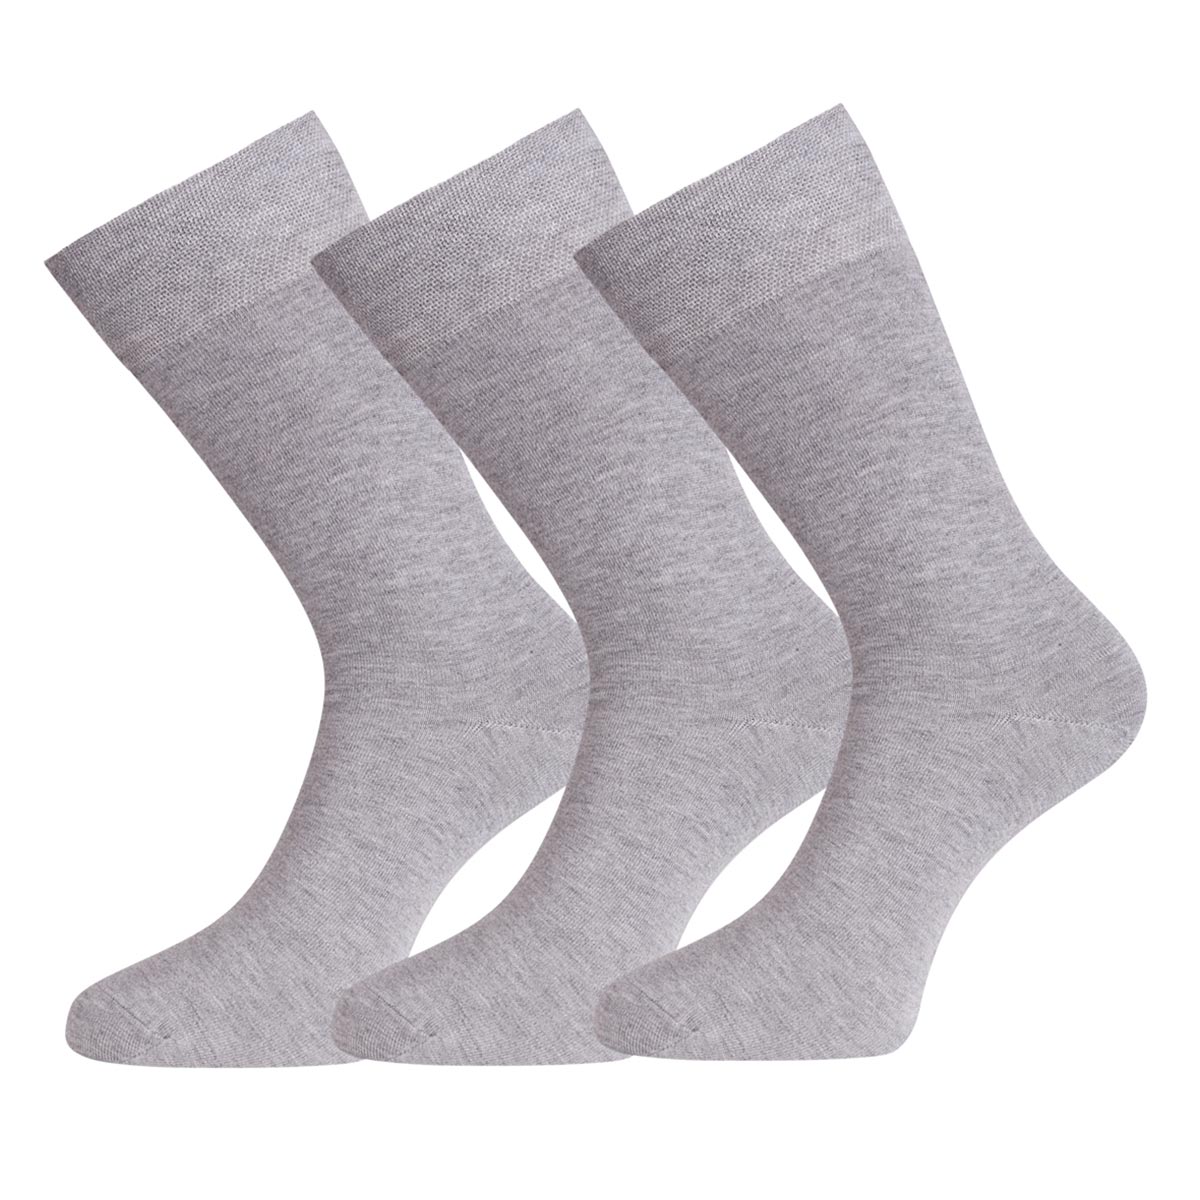 Socks Beau (Pack of 3) - Grey Melange <table class="eigenschappen">
<tbody>
<tr>
<td width="60"><img class="size-full alignleft" src="https://bamboobasics.com/wp-content/uploads/2021/05/Zijdezacht-GROEN.png" alt="Bamboe kleding: Zijde zacht en fris" width="50" height="50" /></td>
<td><strong>Silky smooth</strong><br />
The fabric is supple and feels silky smooth. Even after several washes! </td>
</tr>
<tr>
<td width="60"><img class="size-full alignleft" src="https://bamboobasics.com/wp-content/uploads/2021/05/Thermo-GROEN.png" alt="Bamboe kleding: Zijde zacht en fris" width="50" height="50" /></td>
<td><strong>Thermo comfort</strong><br />
Bamboo textiles are warm, but also breathable. </td>
</tr>
<tr>
<td width="60"><img class="size-full alignleft" src="https://bamboobasics.com/wp-content/uploads/2021/05/Fresh-GROEN.png" alt="Bamboe kleding: Zijde zacht en fris" width="50" height="50" /></td>
<td><strong>Fresh</strong><br />
The bamboo fibers ensure that moisture absorbs and evaporates faster. Bamboo absorbs up to 70% more moisture than cotton. </td>
</tr>
<tr>
<td width="60"><img class="size-full alignleft" src="https://bamboobasics.com/wp-content/uploads/2021/05/UV-protection-GROEN.png" alt="Bamboe kleding: Zijde zacht en fris" width="50" height="50" /></td>
<td><strong>UV protection</strong><br />
Bamboo is naturally UV protective and filters 98% of harmful UV rays. </td>
</tr>
<tr>
<td width="60"><img class="size-full alignleft" src="https://bamboobasics.com/wp-content/uploads/2021/05/Allergeen-GROEN.png" alt="Bamboe kleding: Zijde zacht en fris" width="50" height="50" /></td>
<td><strong>Hypoallergenic</strong><br />
Do you have sensitive skin or suffer from allergies? Then bamboo underwear is the ideal choice for you. </td>
</tr>
<tr>
<td width="60"><img class="size-full alignleft" src="https://bamboobasics.com/wp-content/uploads/2021/05/Fit-GROEN.png" alt="Bamboe kleding: Zijde zacht en fris" width="50" height="50" /></td>
<td><strong>Perfect fit</strong><br />
The combination of elastane and cotton with bamboo ensures an extra strong fabric and a perfect fit. </td>
</tr>
</tbody>
</table>